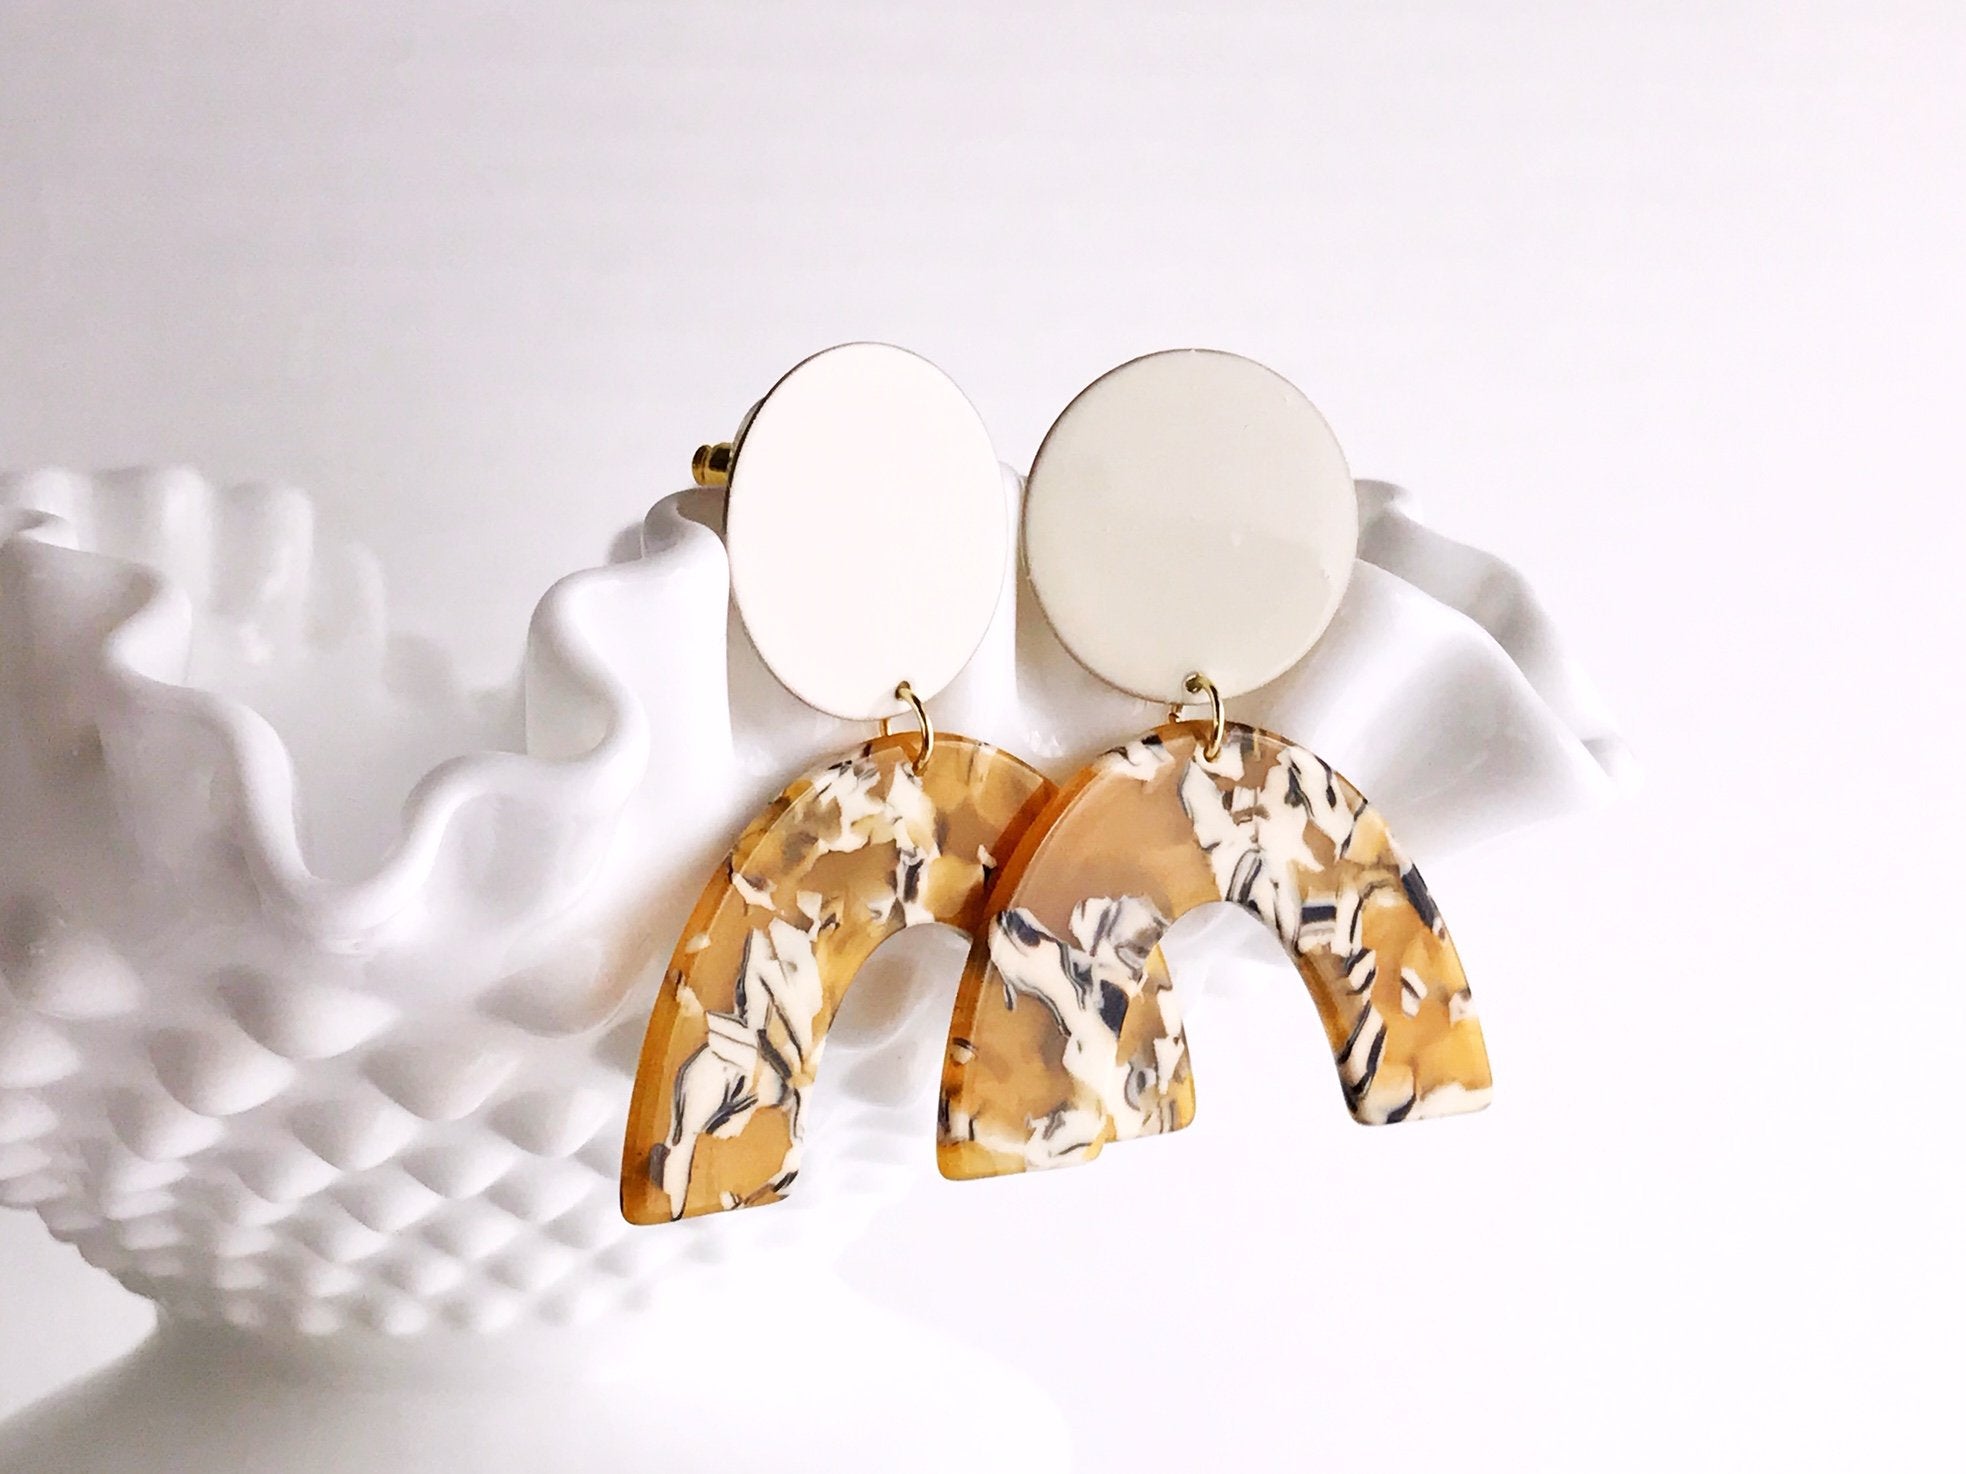 Ivory and Mustard Safari Earrings - Handcrafted Statement Jewelry - Jewelry & Watches - Bijou Her -  -  - 